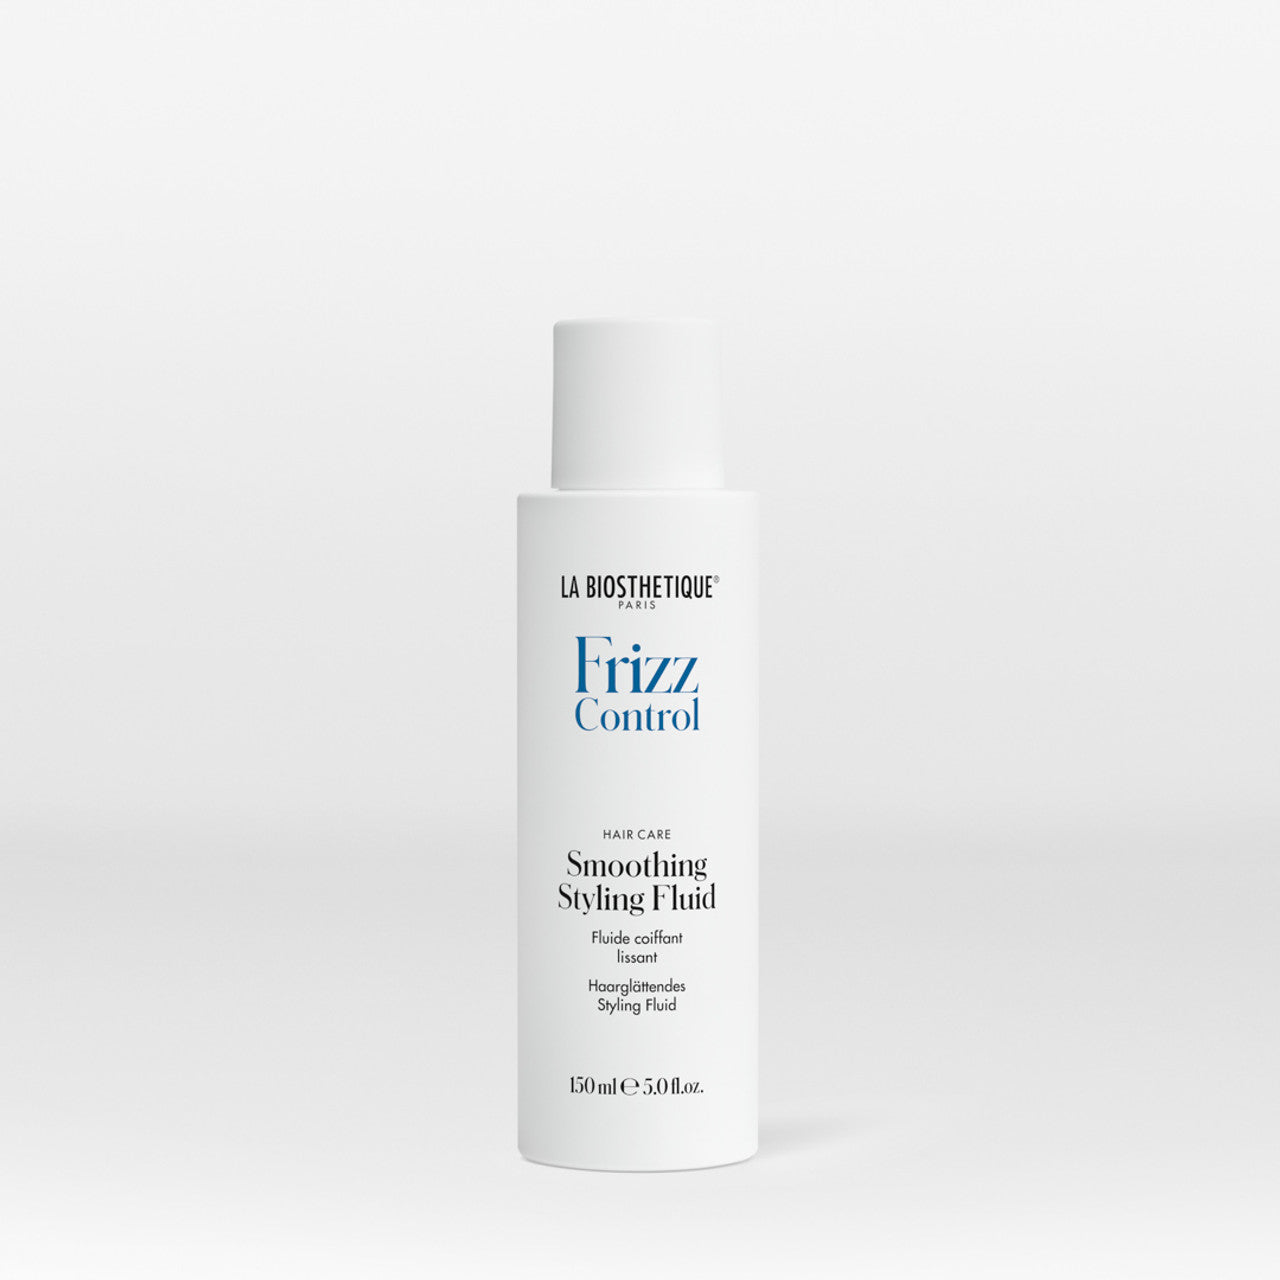 La Biosthetique's Frizz Control Smoothing Styling Fluid